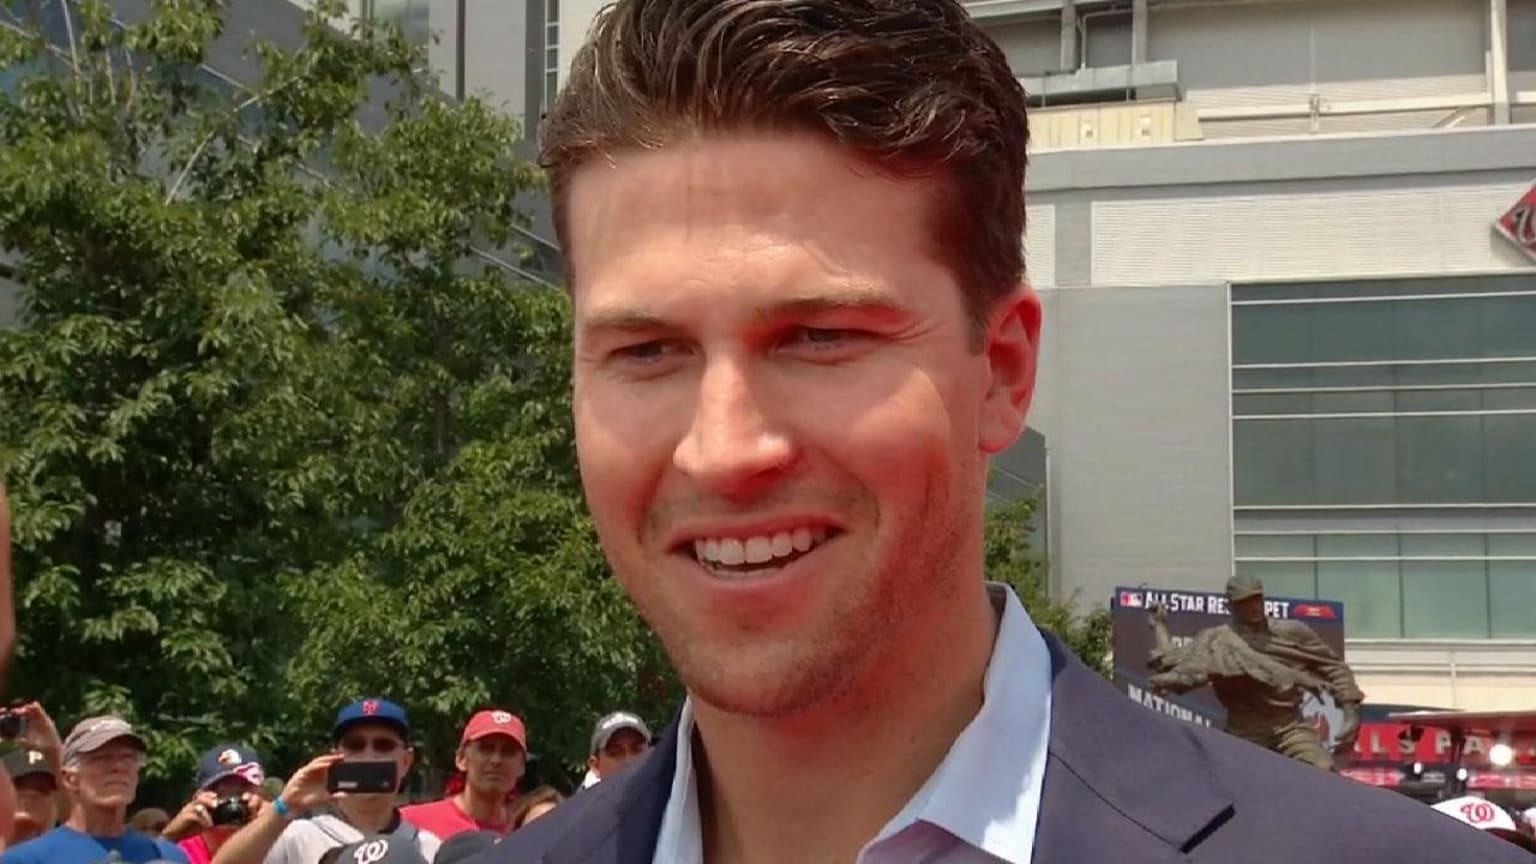 deGrom on his fashion, 07/17/2018